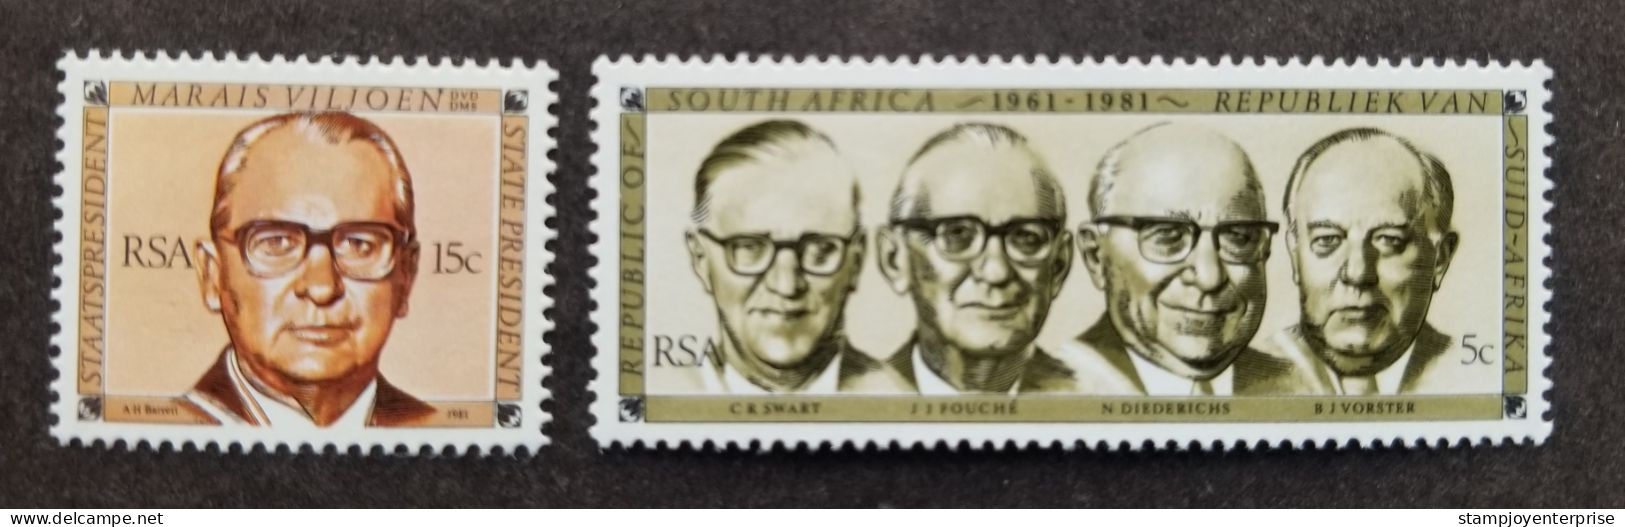 South Africa 20th Anniversary Founding Republic 1981 President (stamp) MNH - Unused Stamps